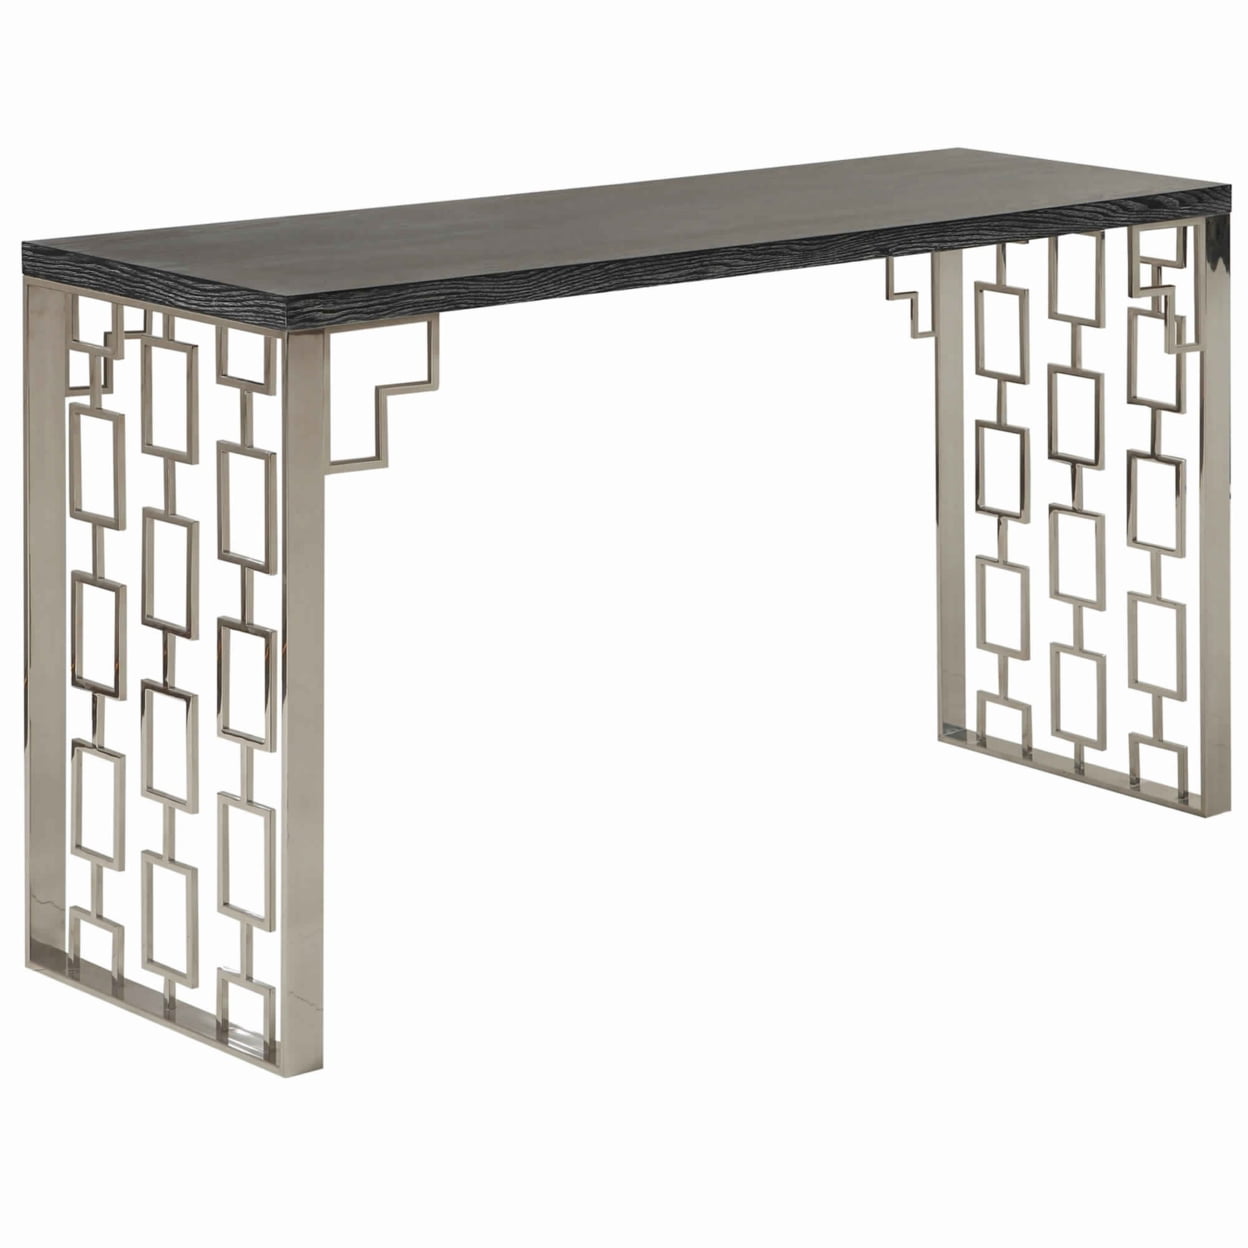 Bm10114 Wooden Top Metal Console Table With Lattice Cut Side Panel, Gray & Silver